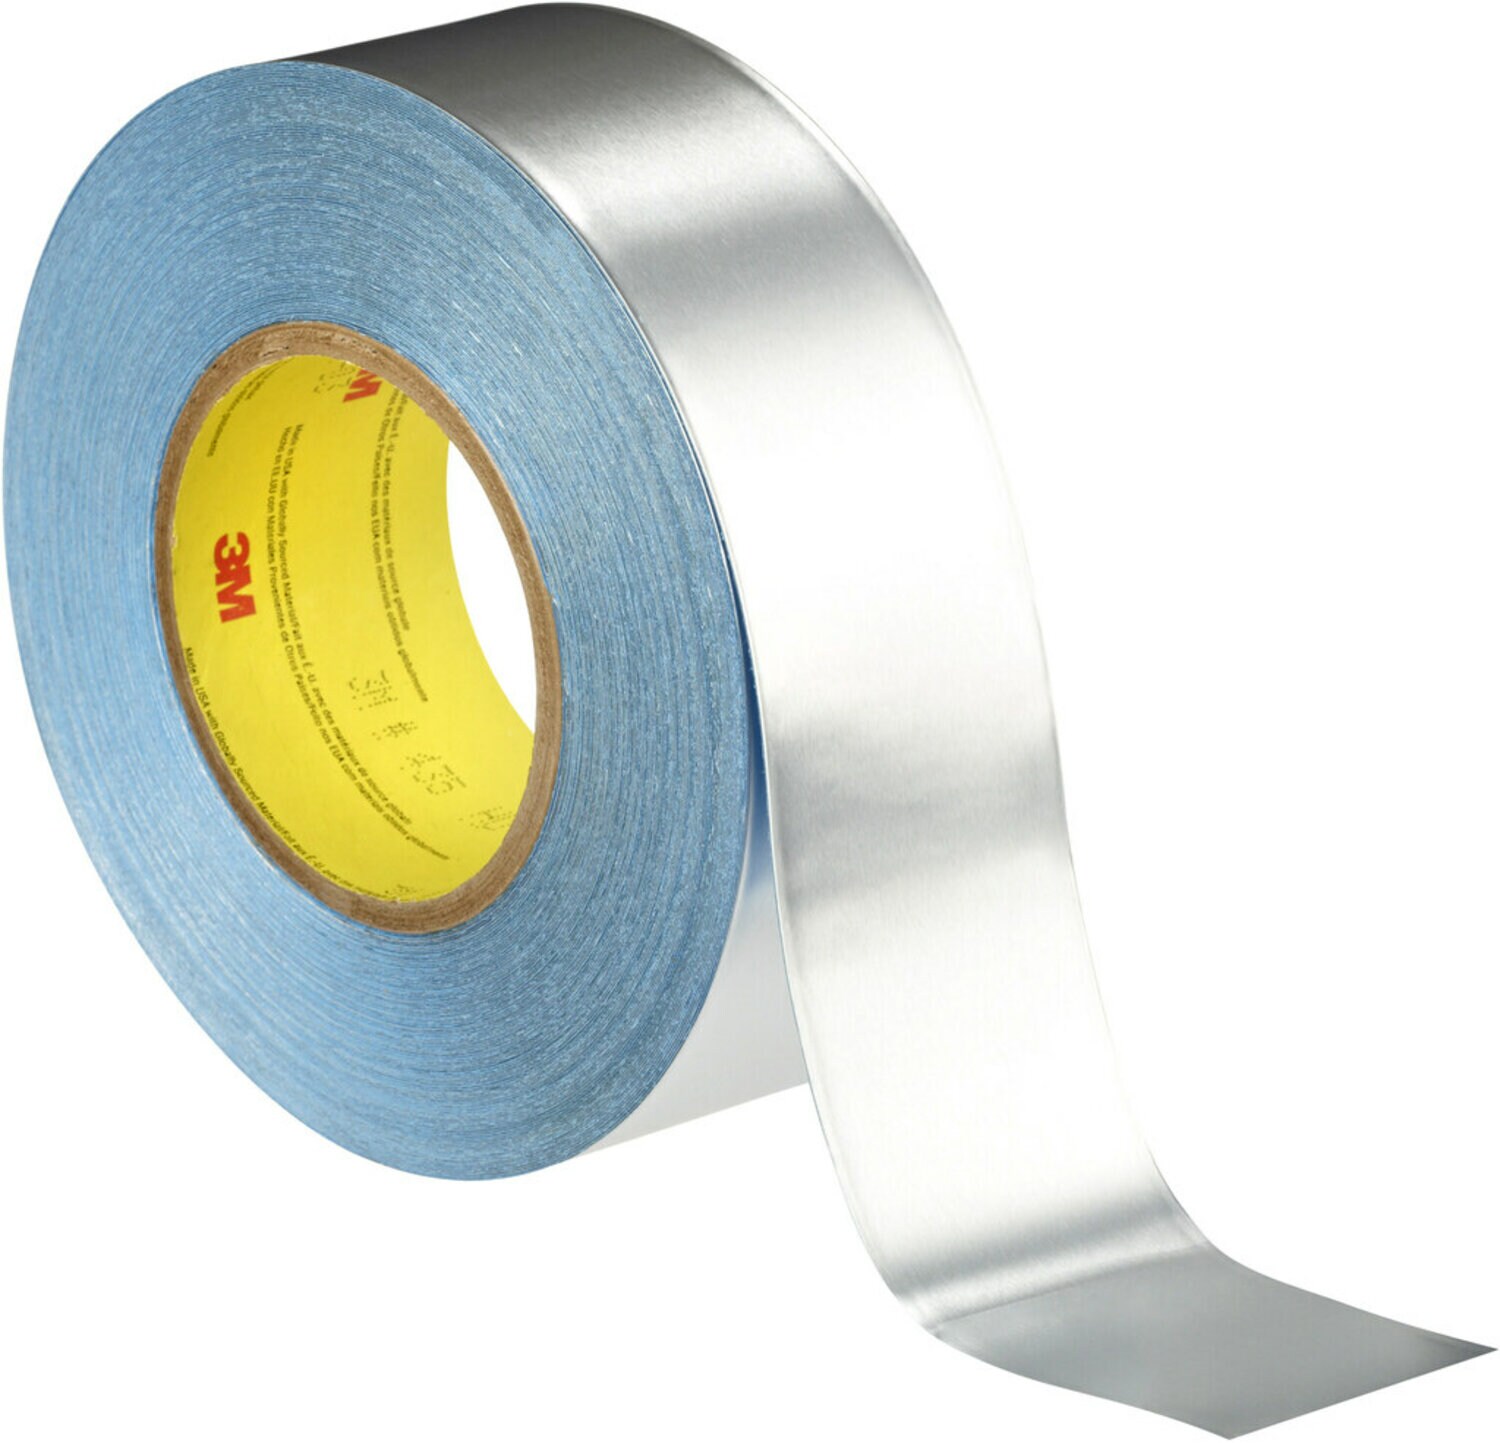 7000049122 - 3M Vibration Damping Tape 435, Silver, 2 in x 36 yd, 13.5 mil, 6 rolls
per case